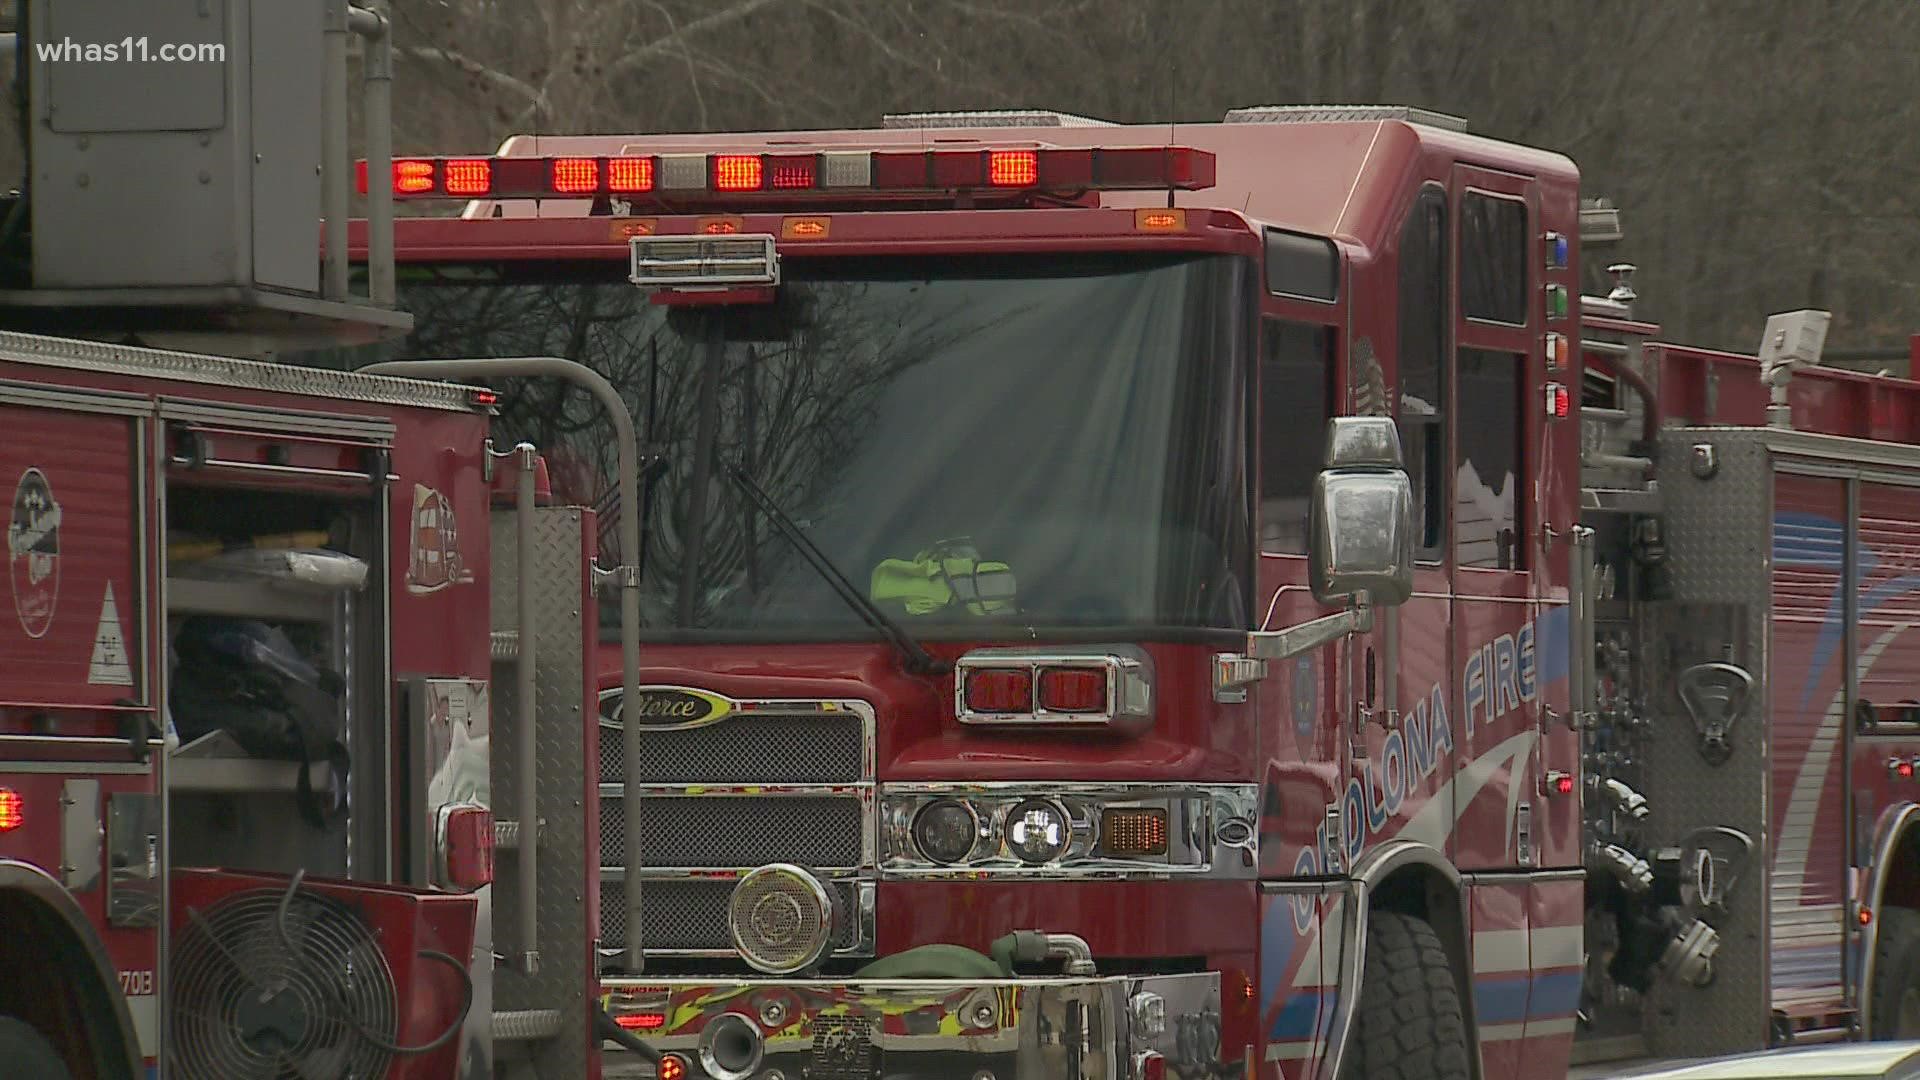 Louisville officials are investigating after three people, including two children, were taken to the hospital after a fire at a mobile home near Okolona.